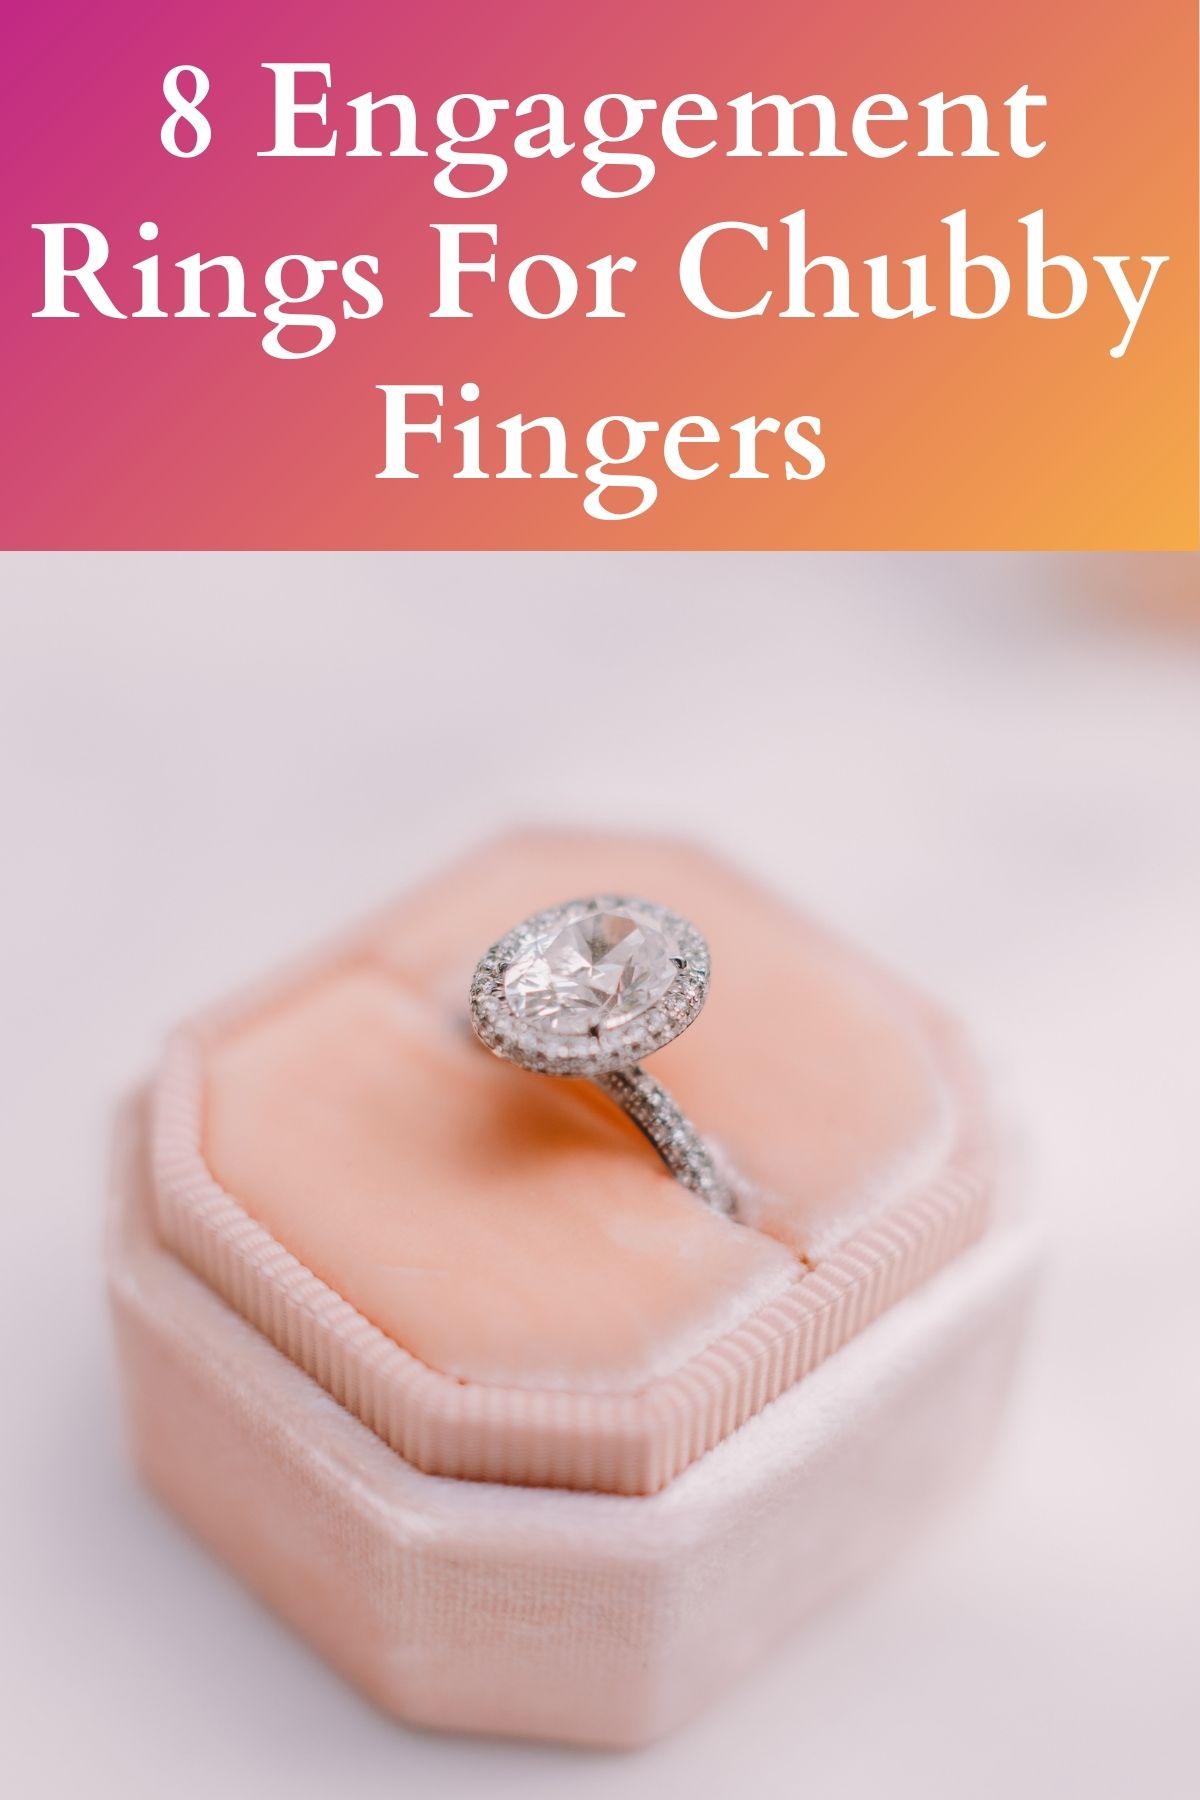 8 Engagement Rings For Chubby Fingers